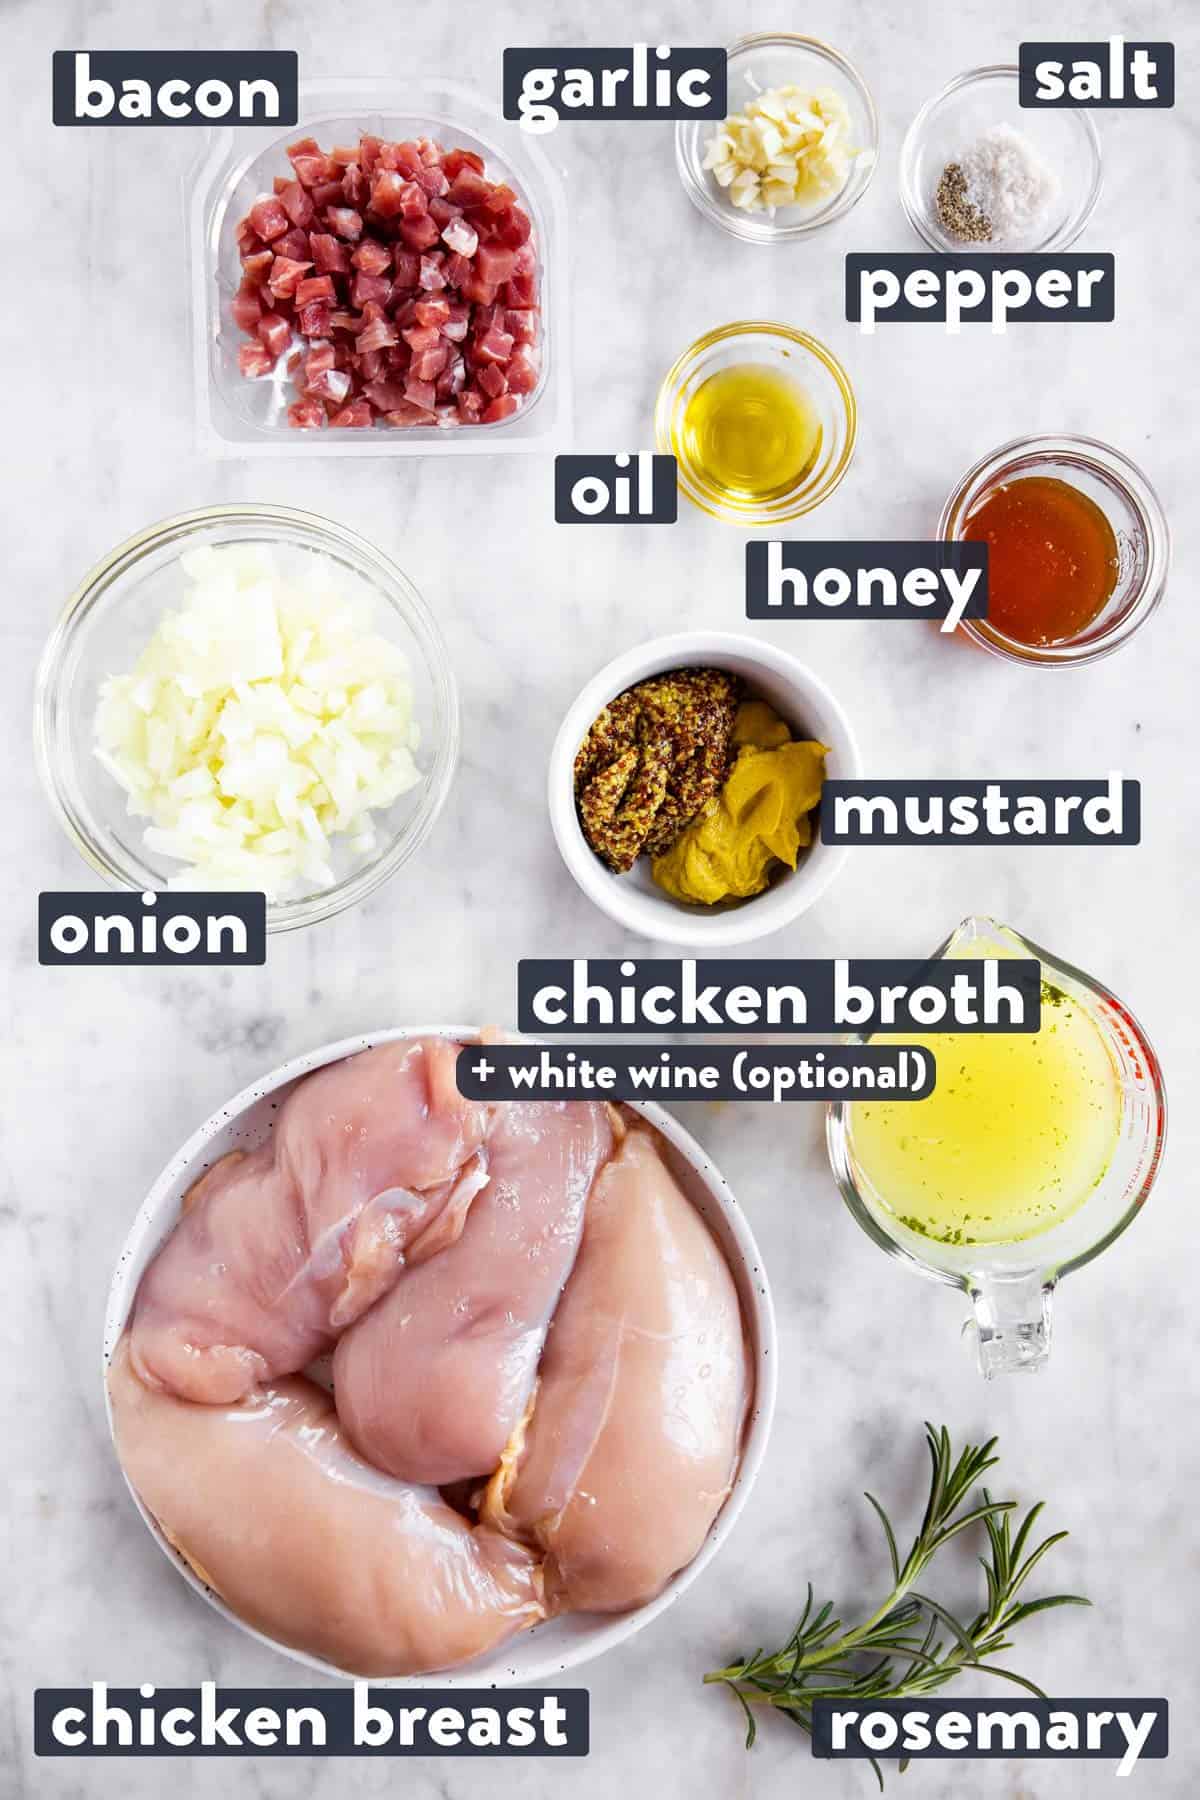 ingredients for honey mustard chicken with text labels